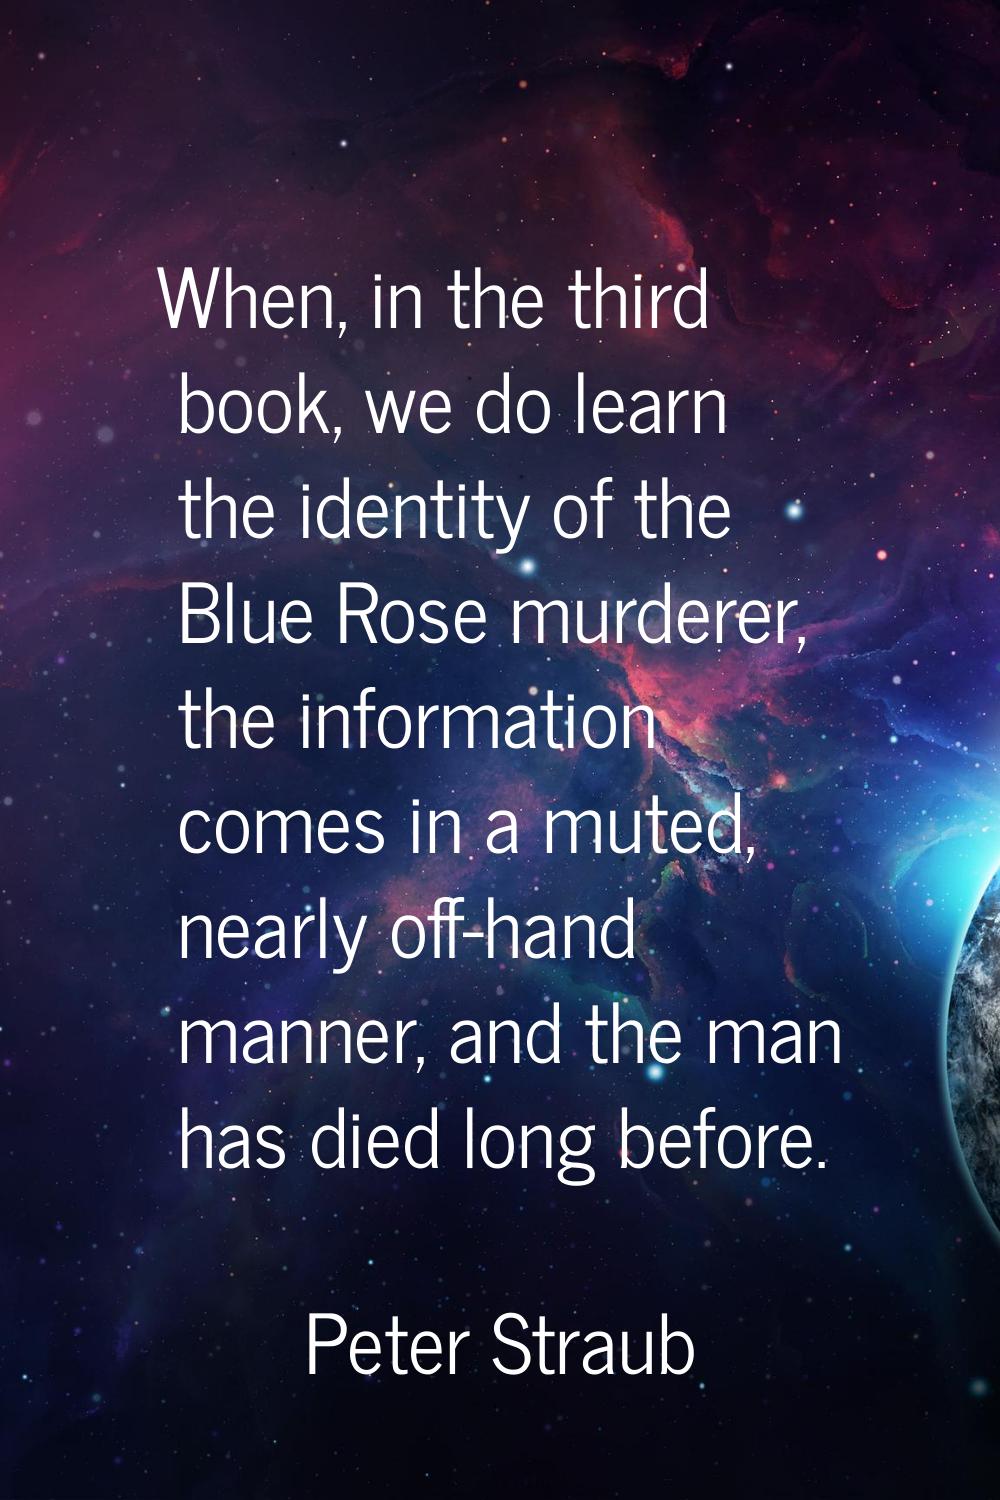 When, in the third book, we do learn the identity of the Blue Rose murderer, the information comes 